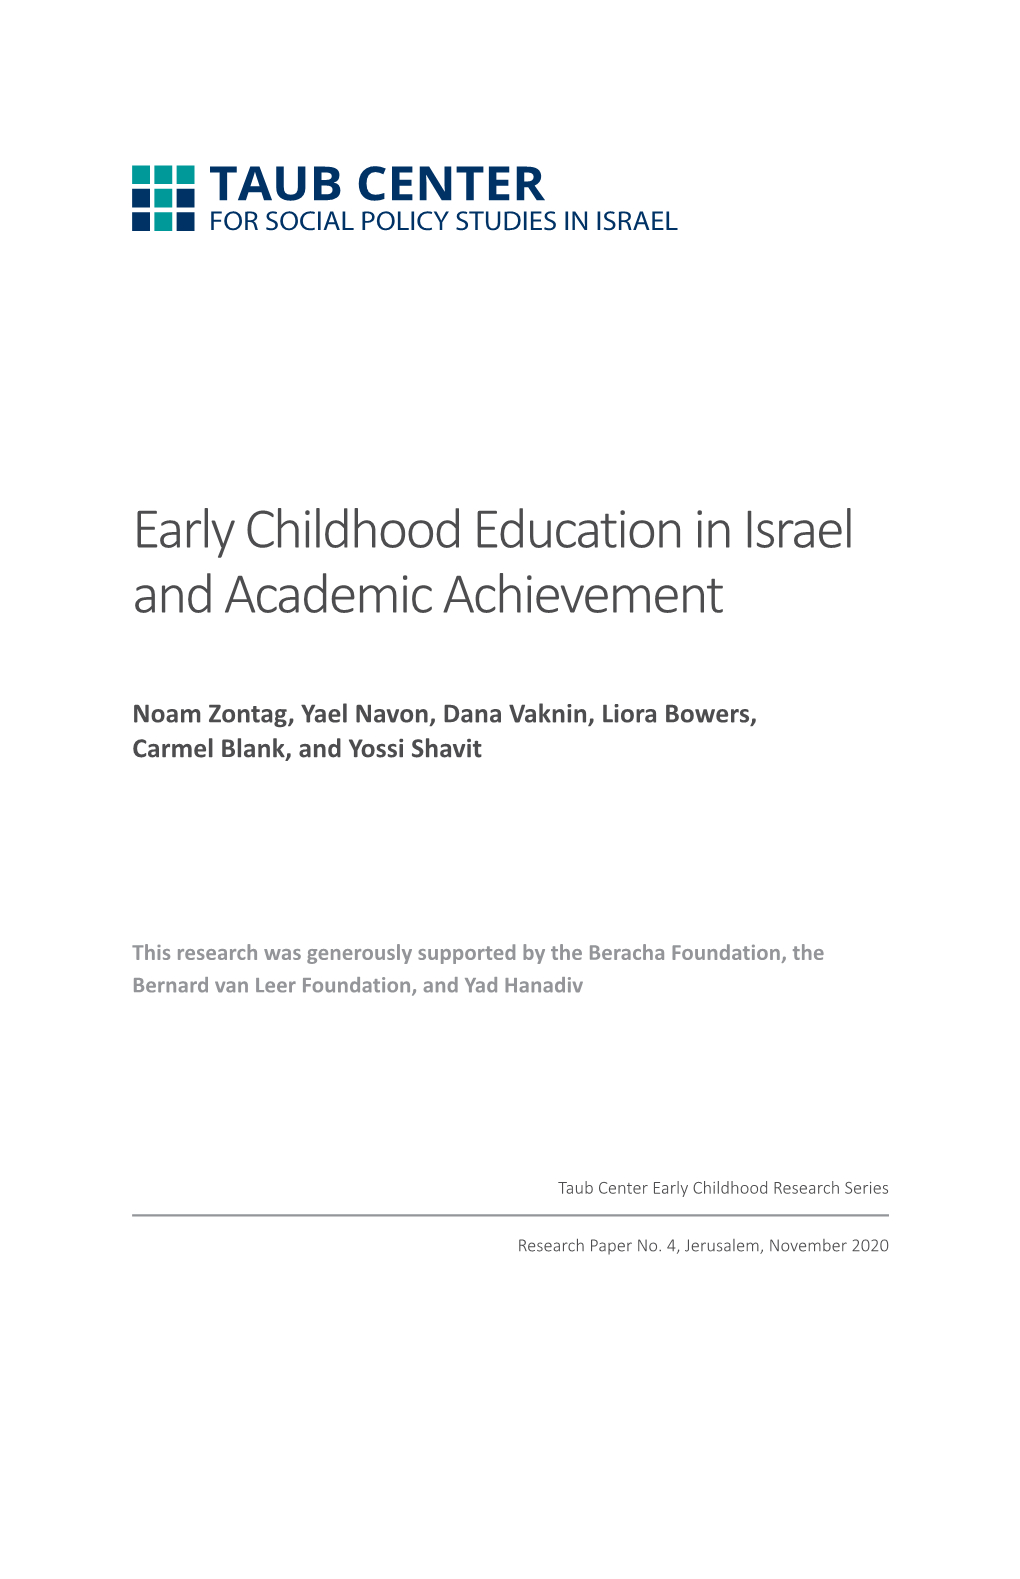 Early Childhood Education in Israel and Academic Achievement